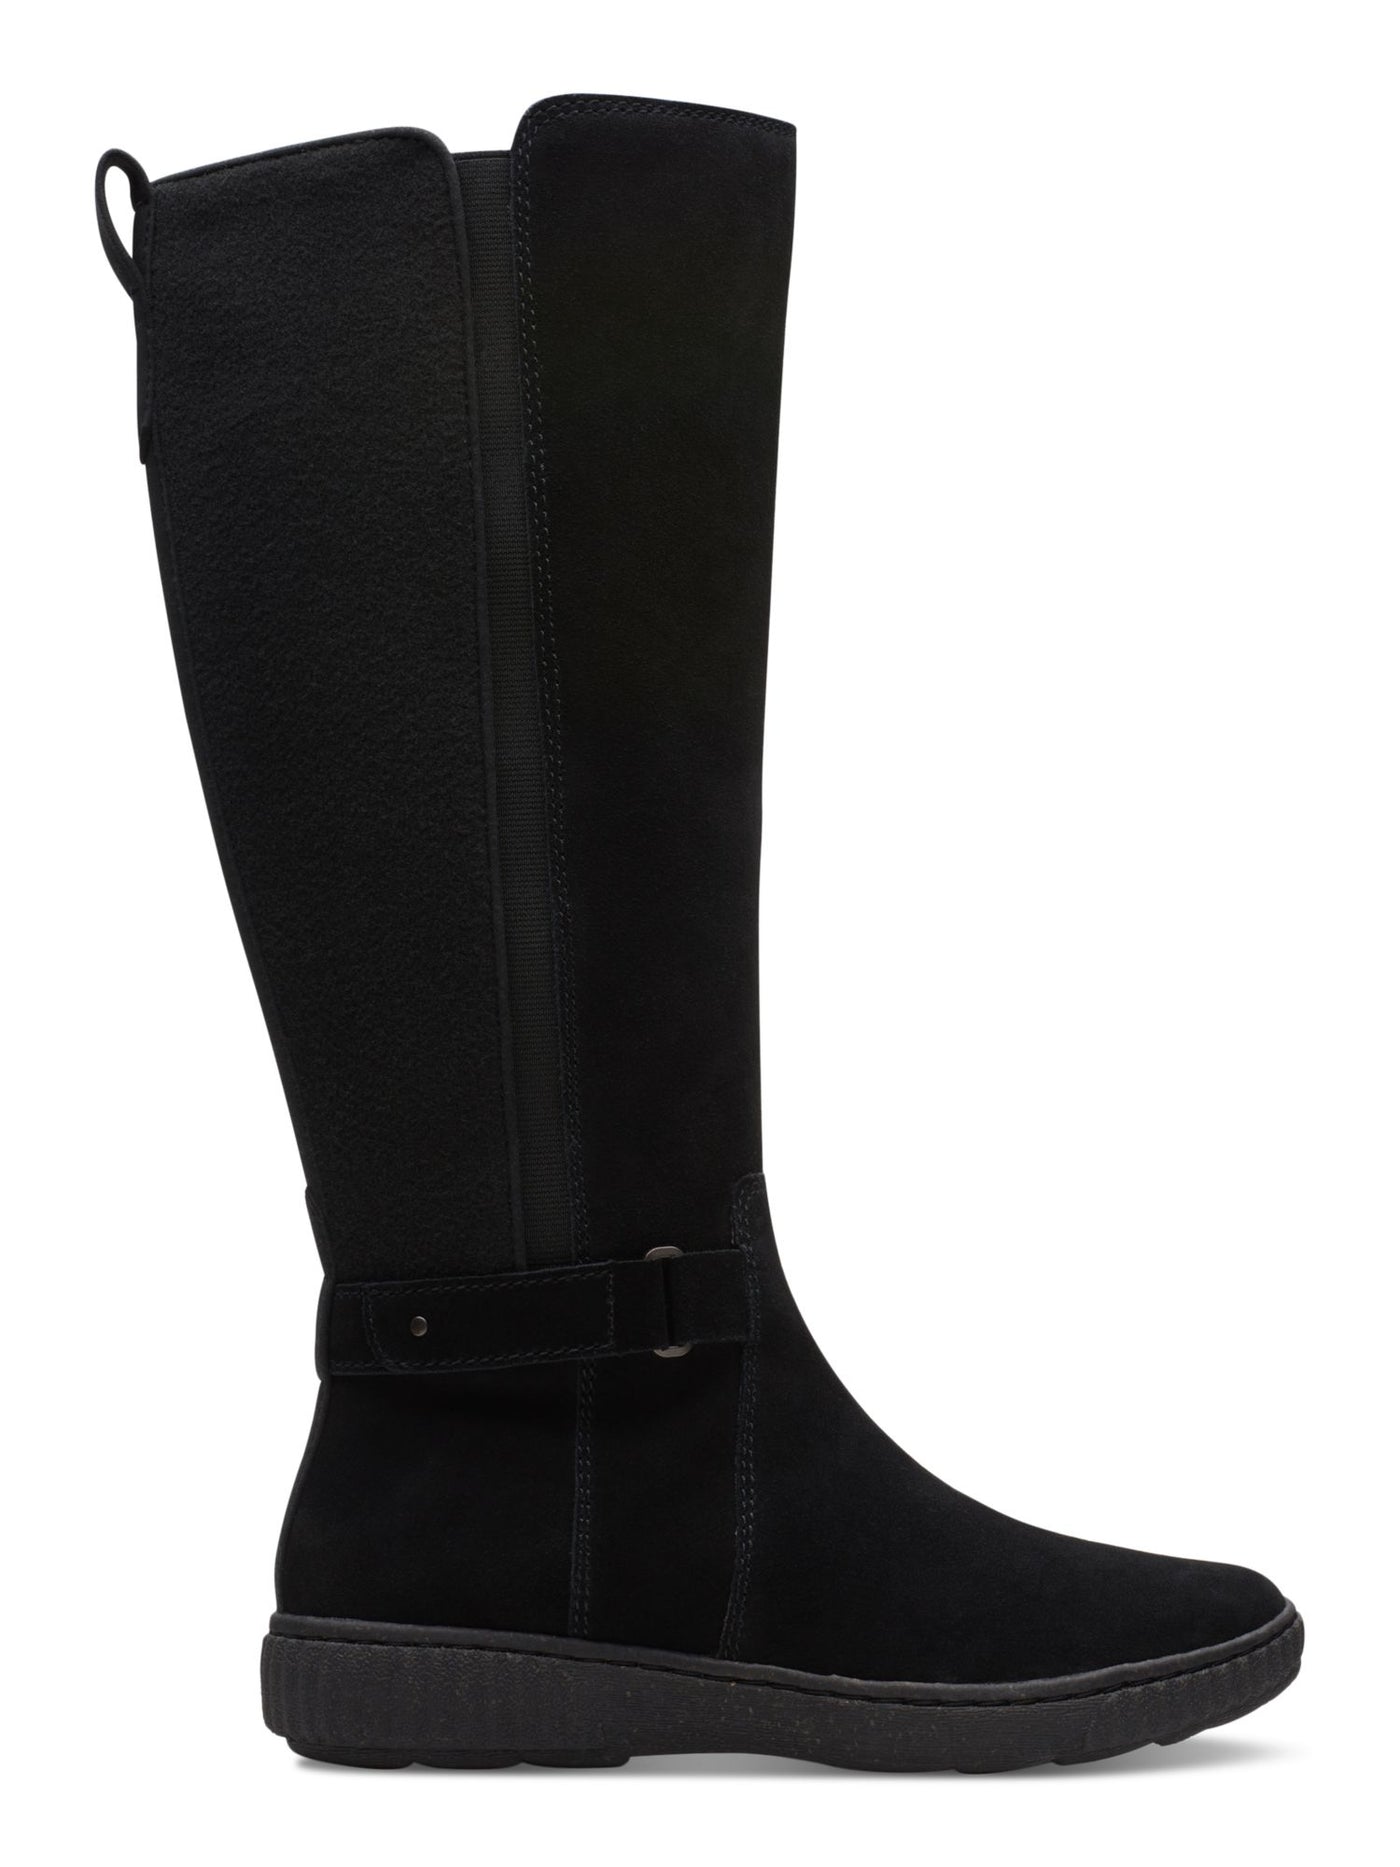 COLLECTION BY CLARKS Womens Black Goring Pull Tab Cushioned Button Accent Caroline Round Toe Platform Zip-Up Leather Riding Boot 9 M